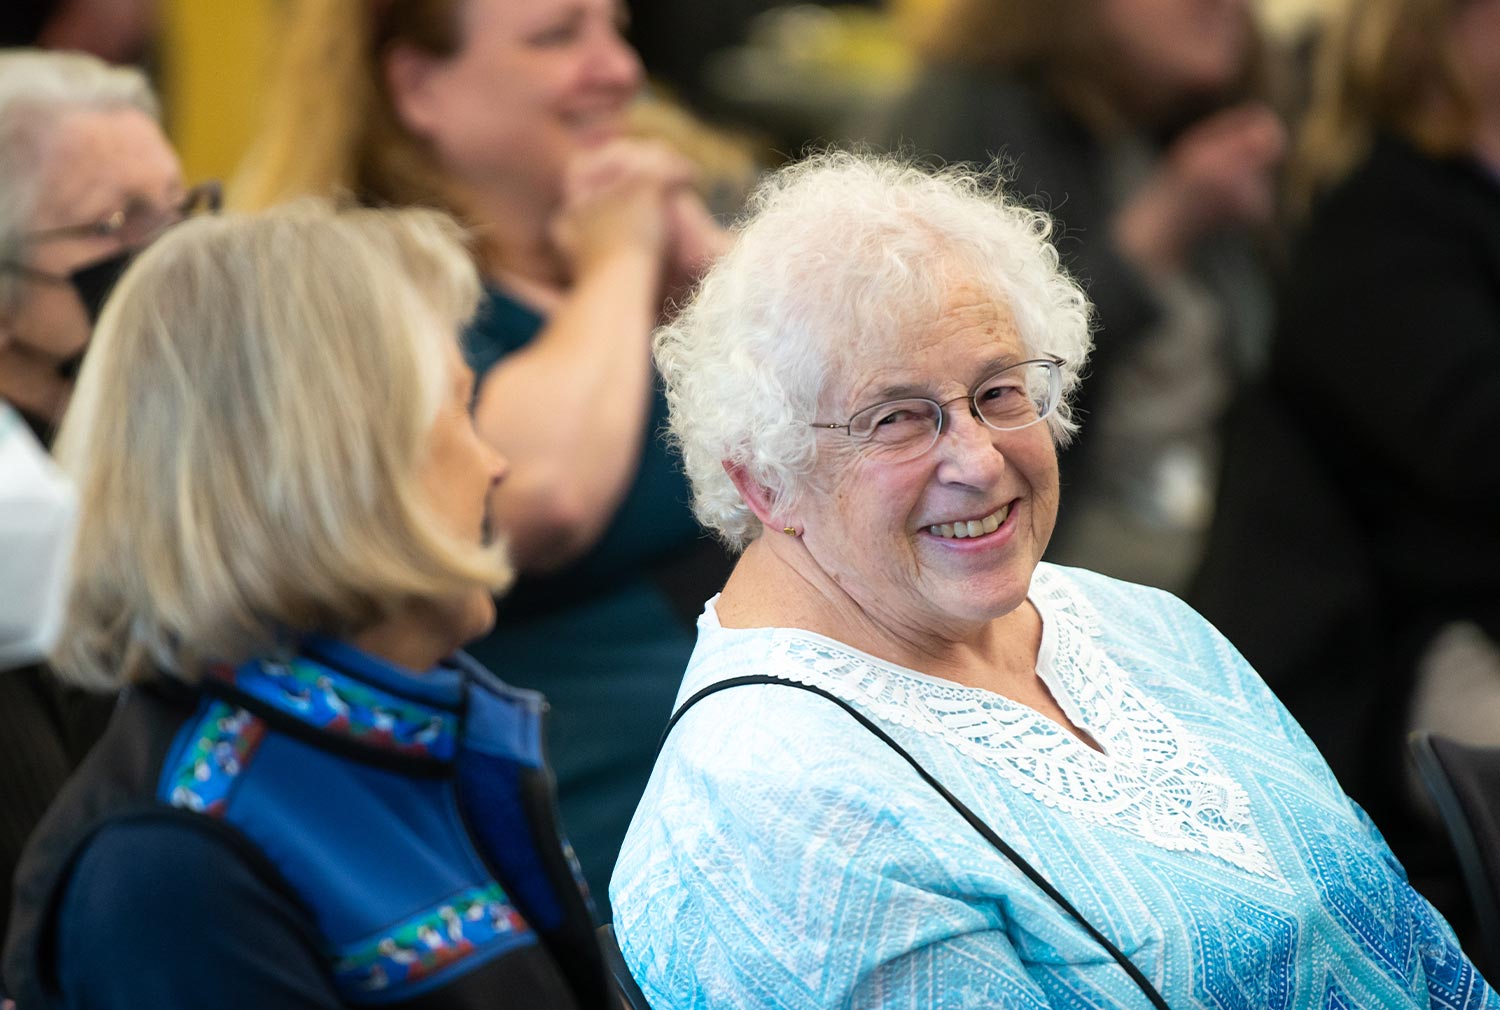 seated in an audience, Nancy Lesh smiles while looking at a woman seated to her right